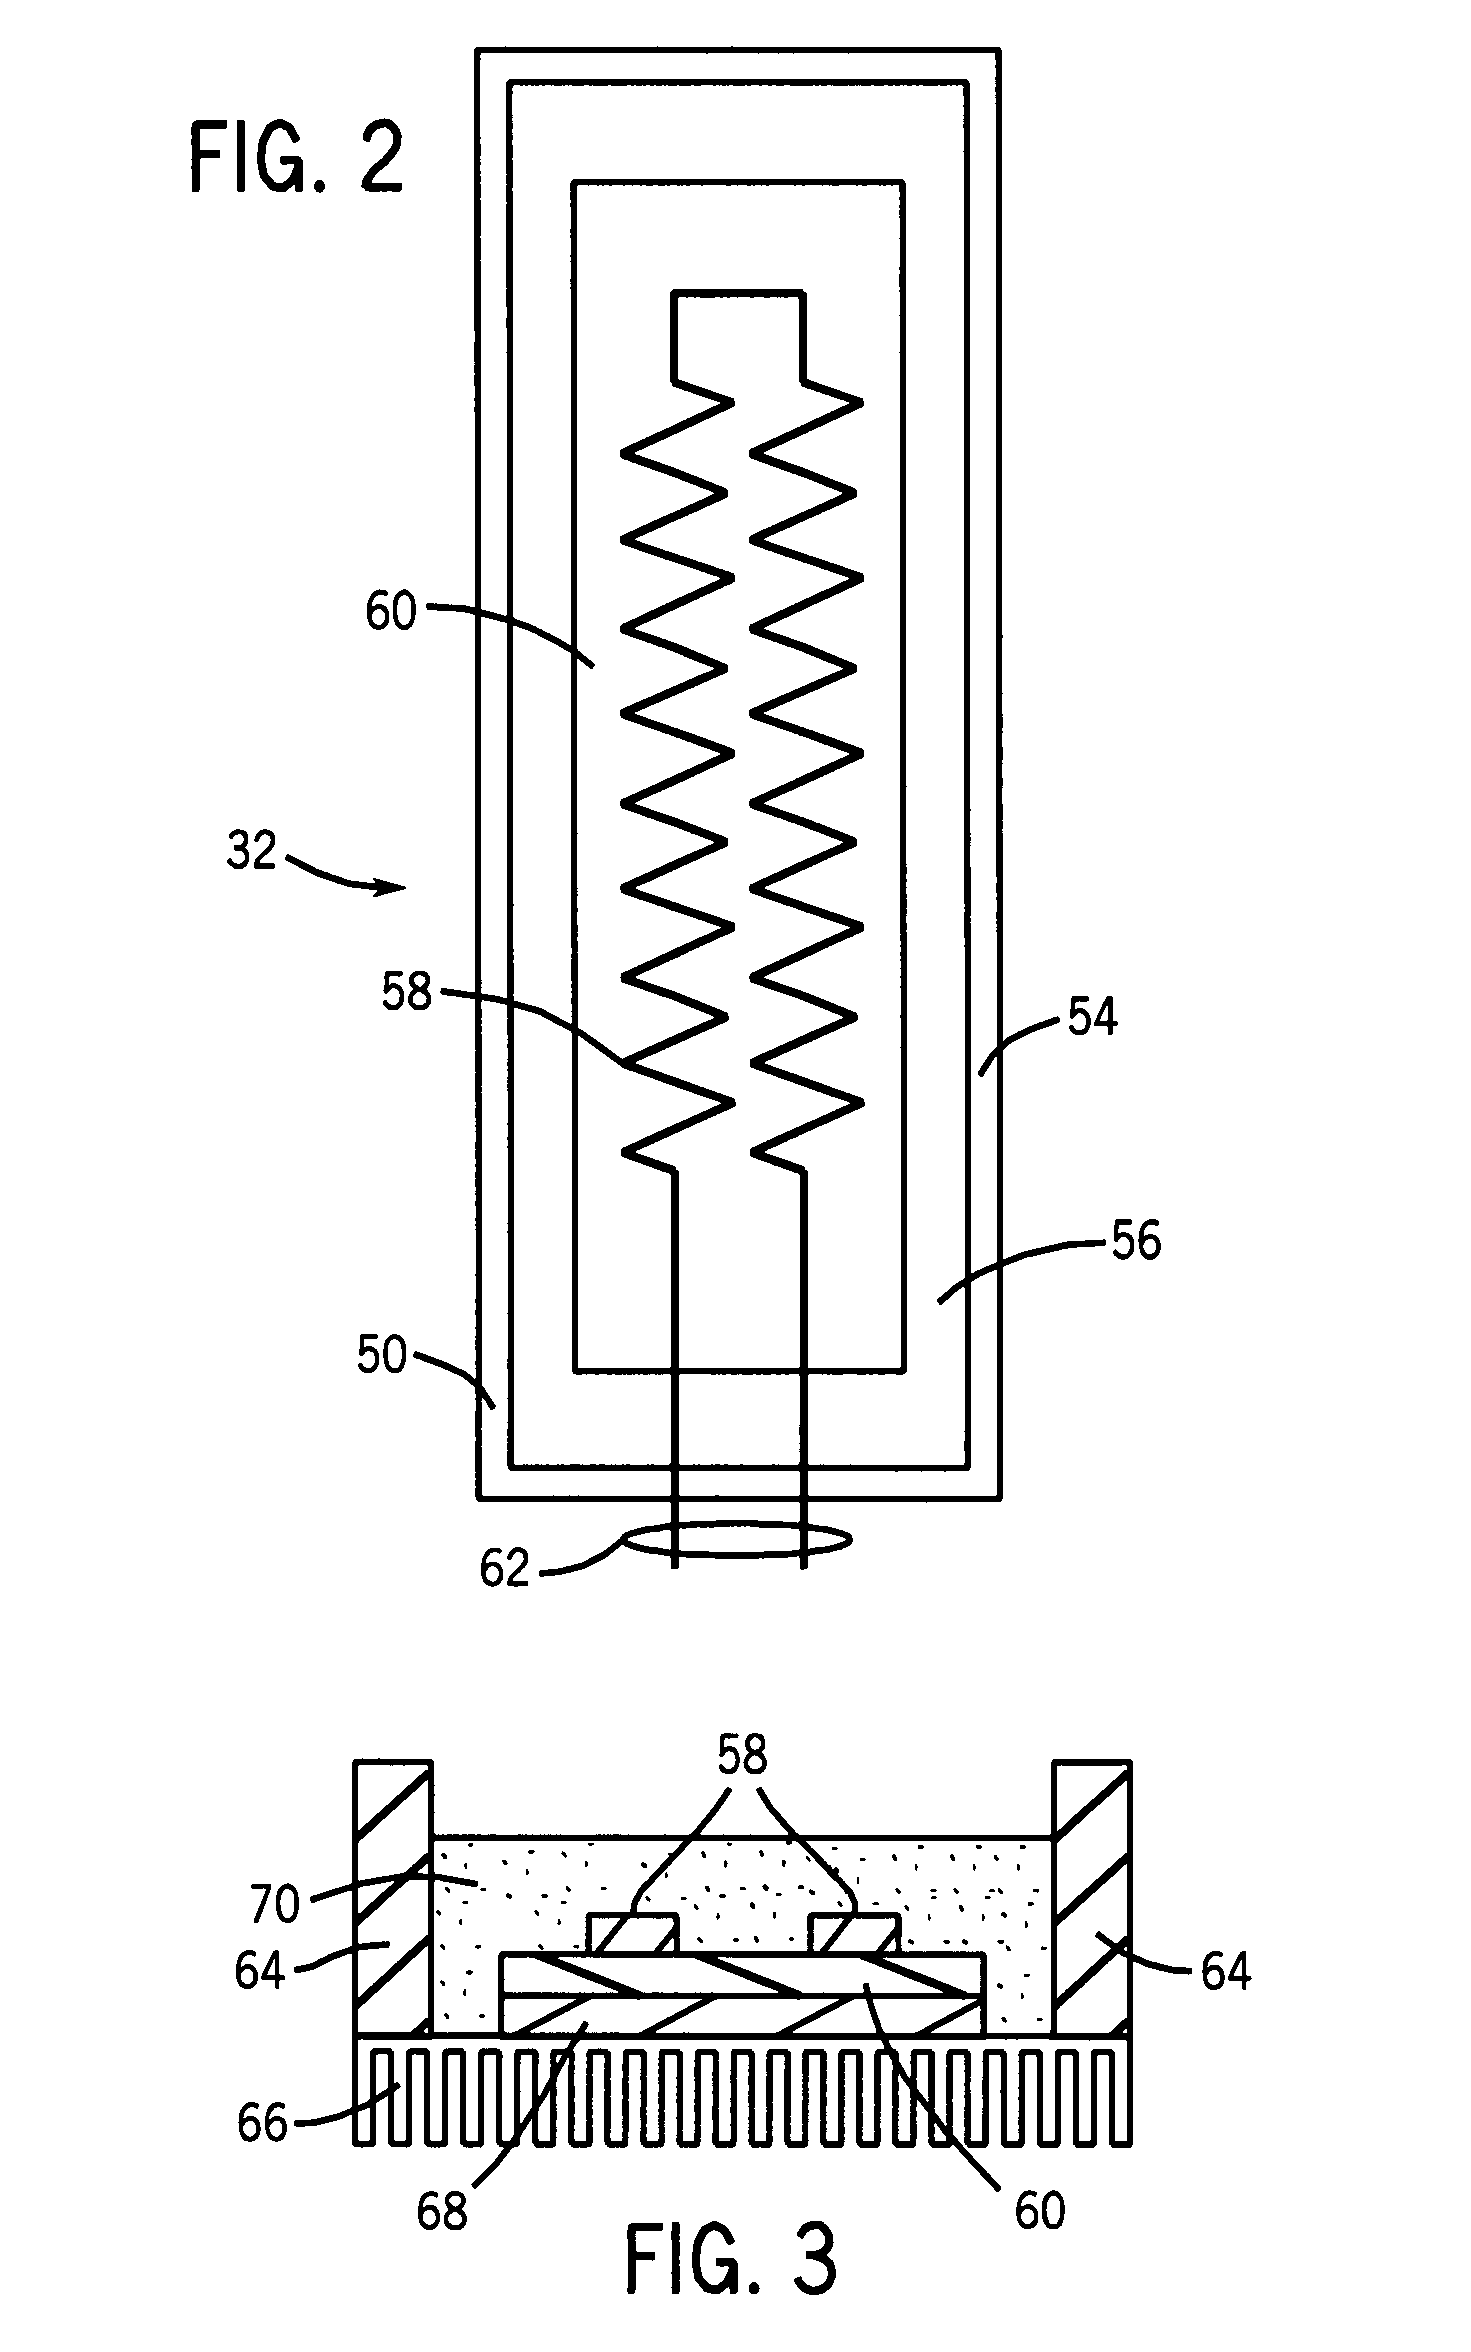 Phase change cooled electrical resistor